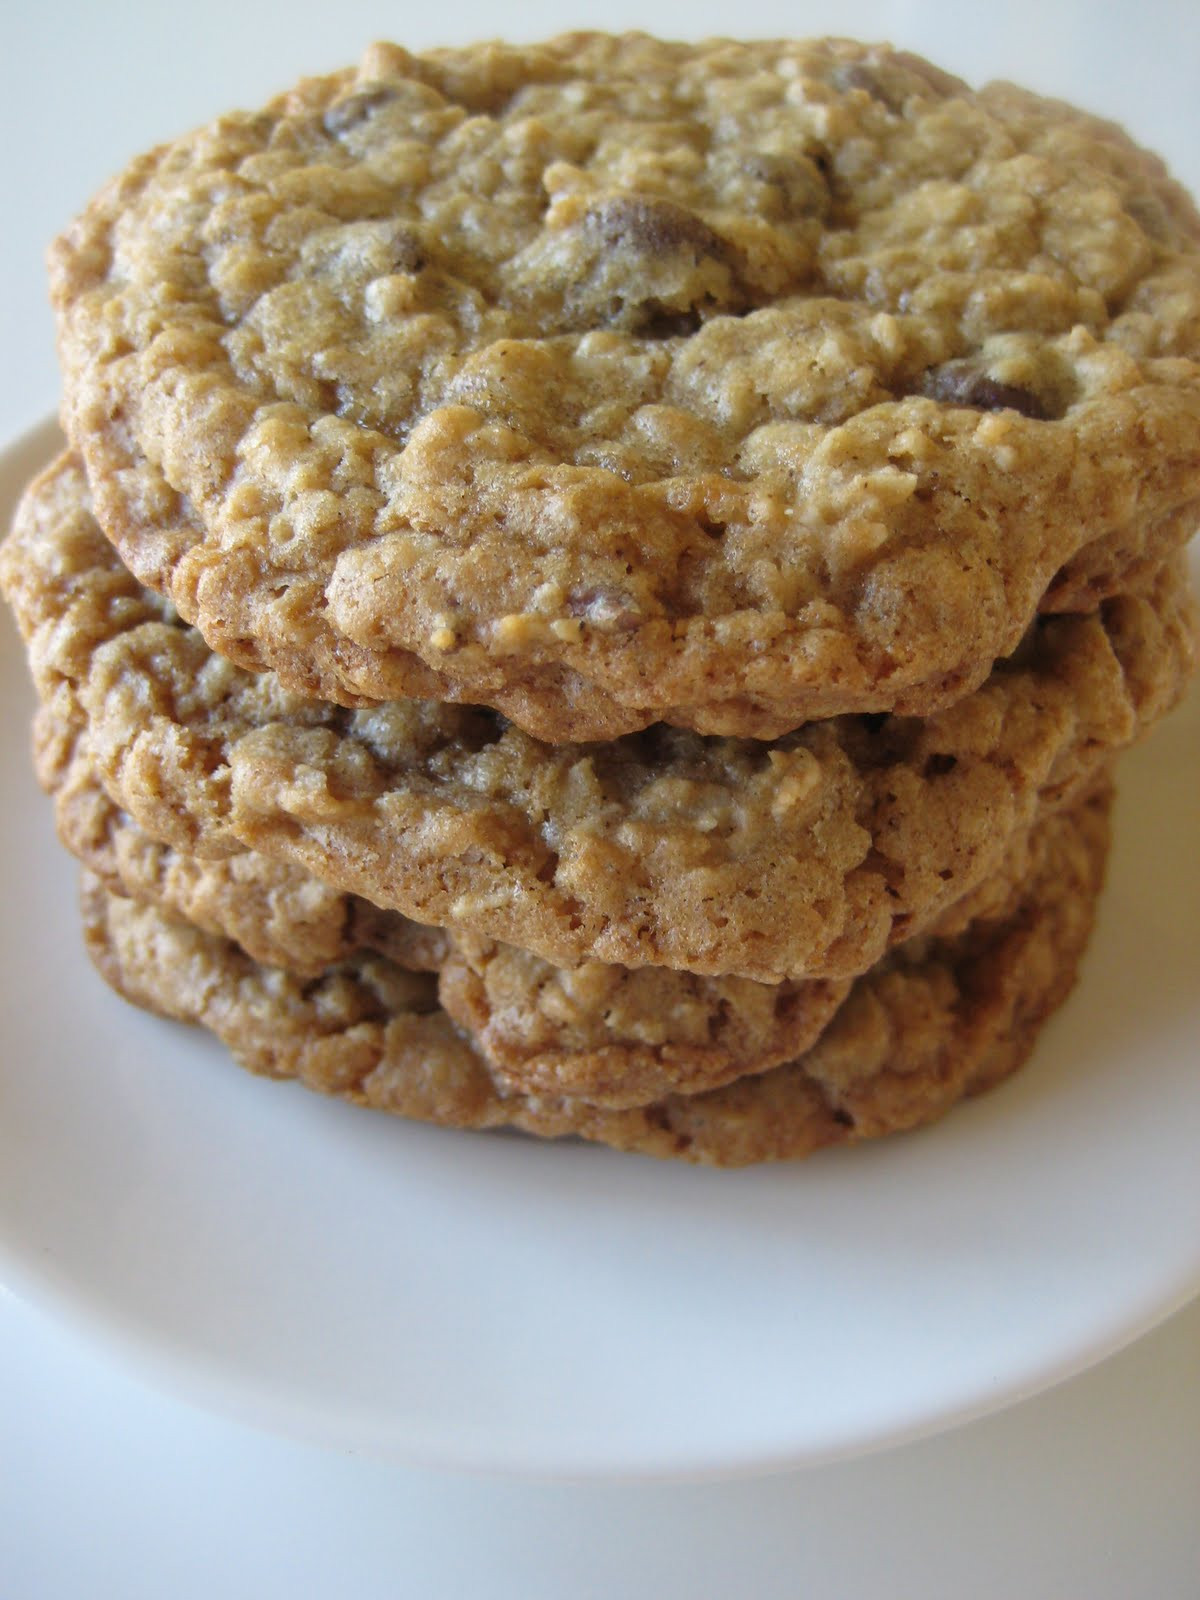 Oatmeal Cookies From Scratch Luxury From Scratch Chocolate Chip Oatmeal Cookies